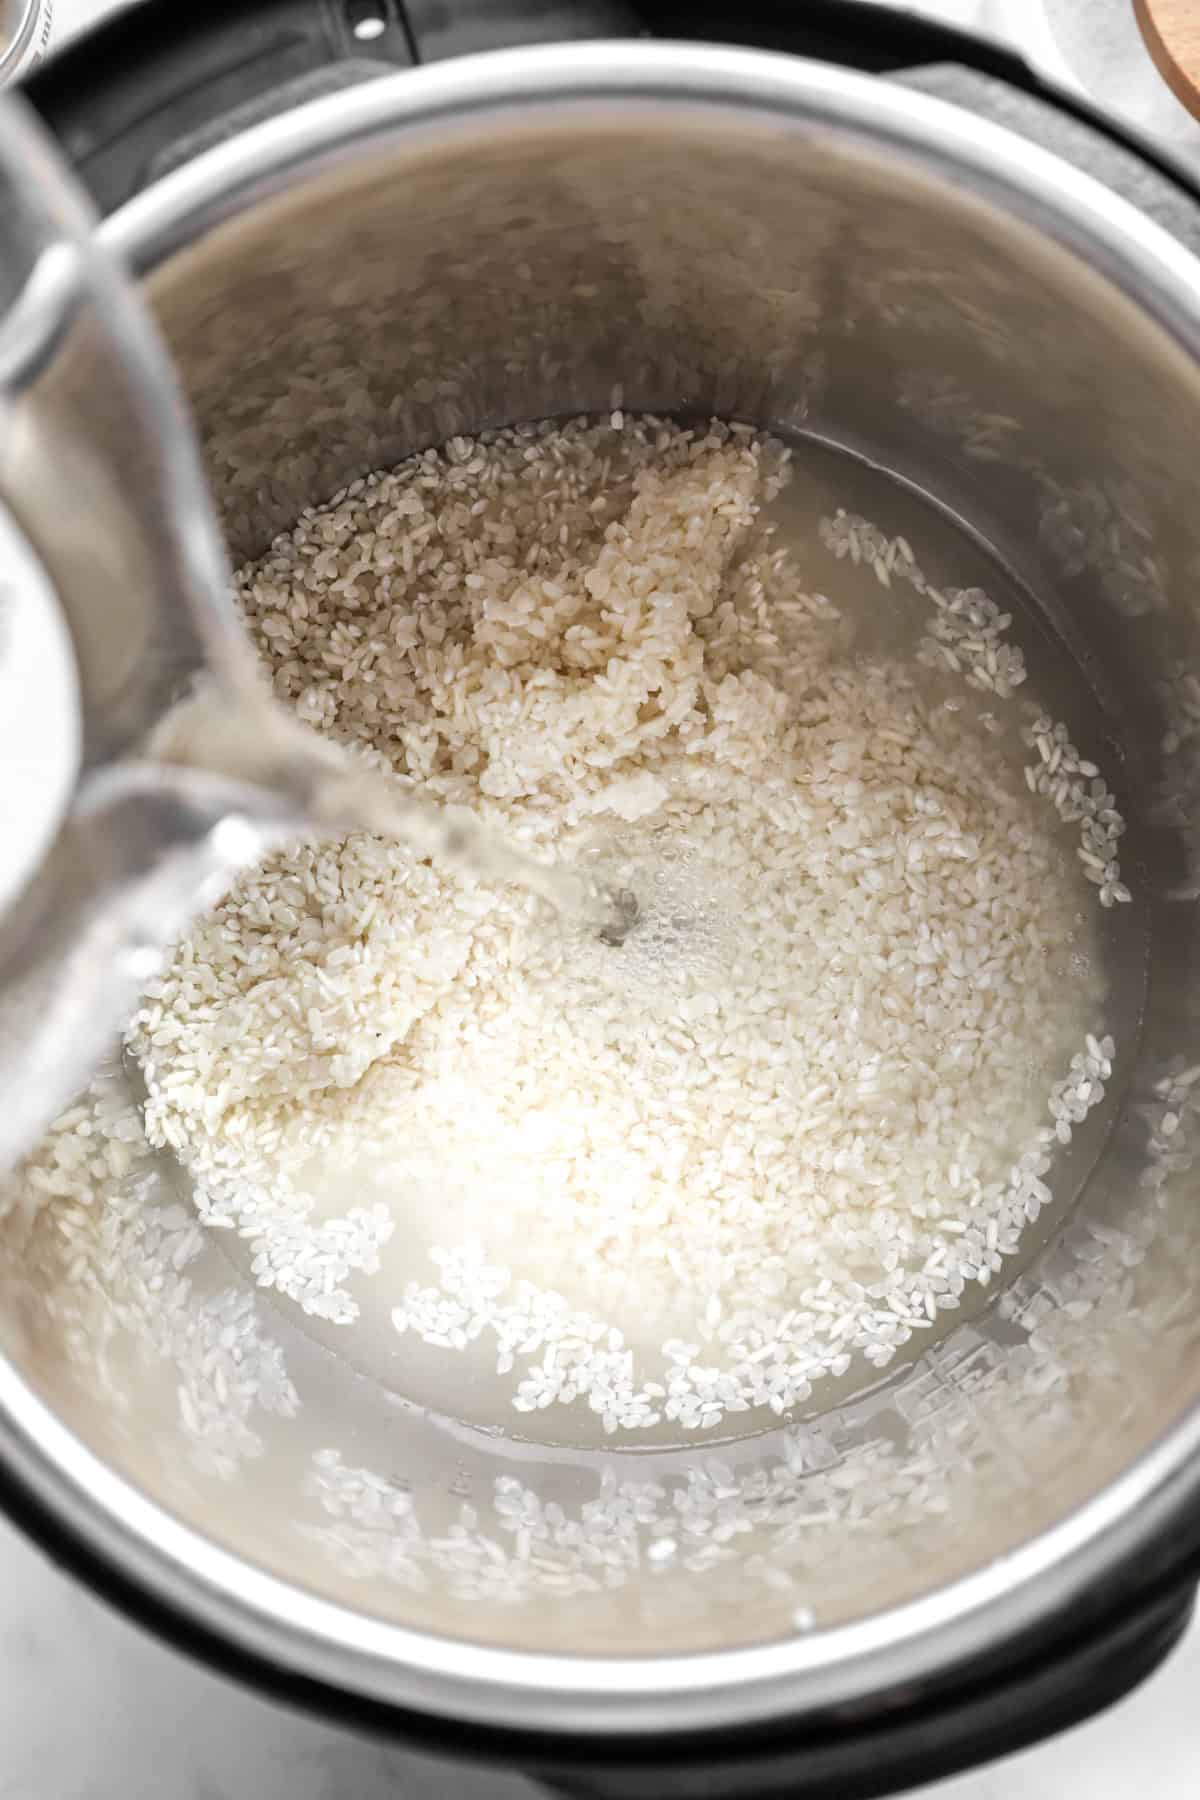 water being poured into the instant pot filled with rice.